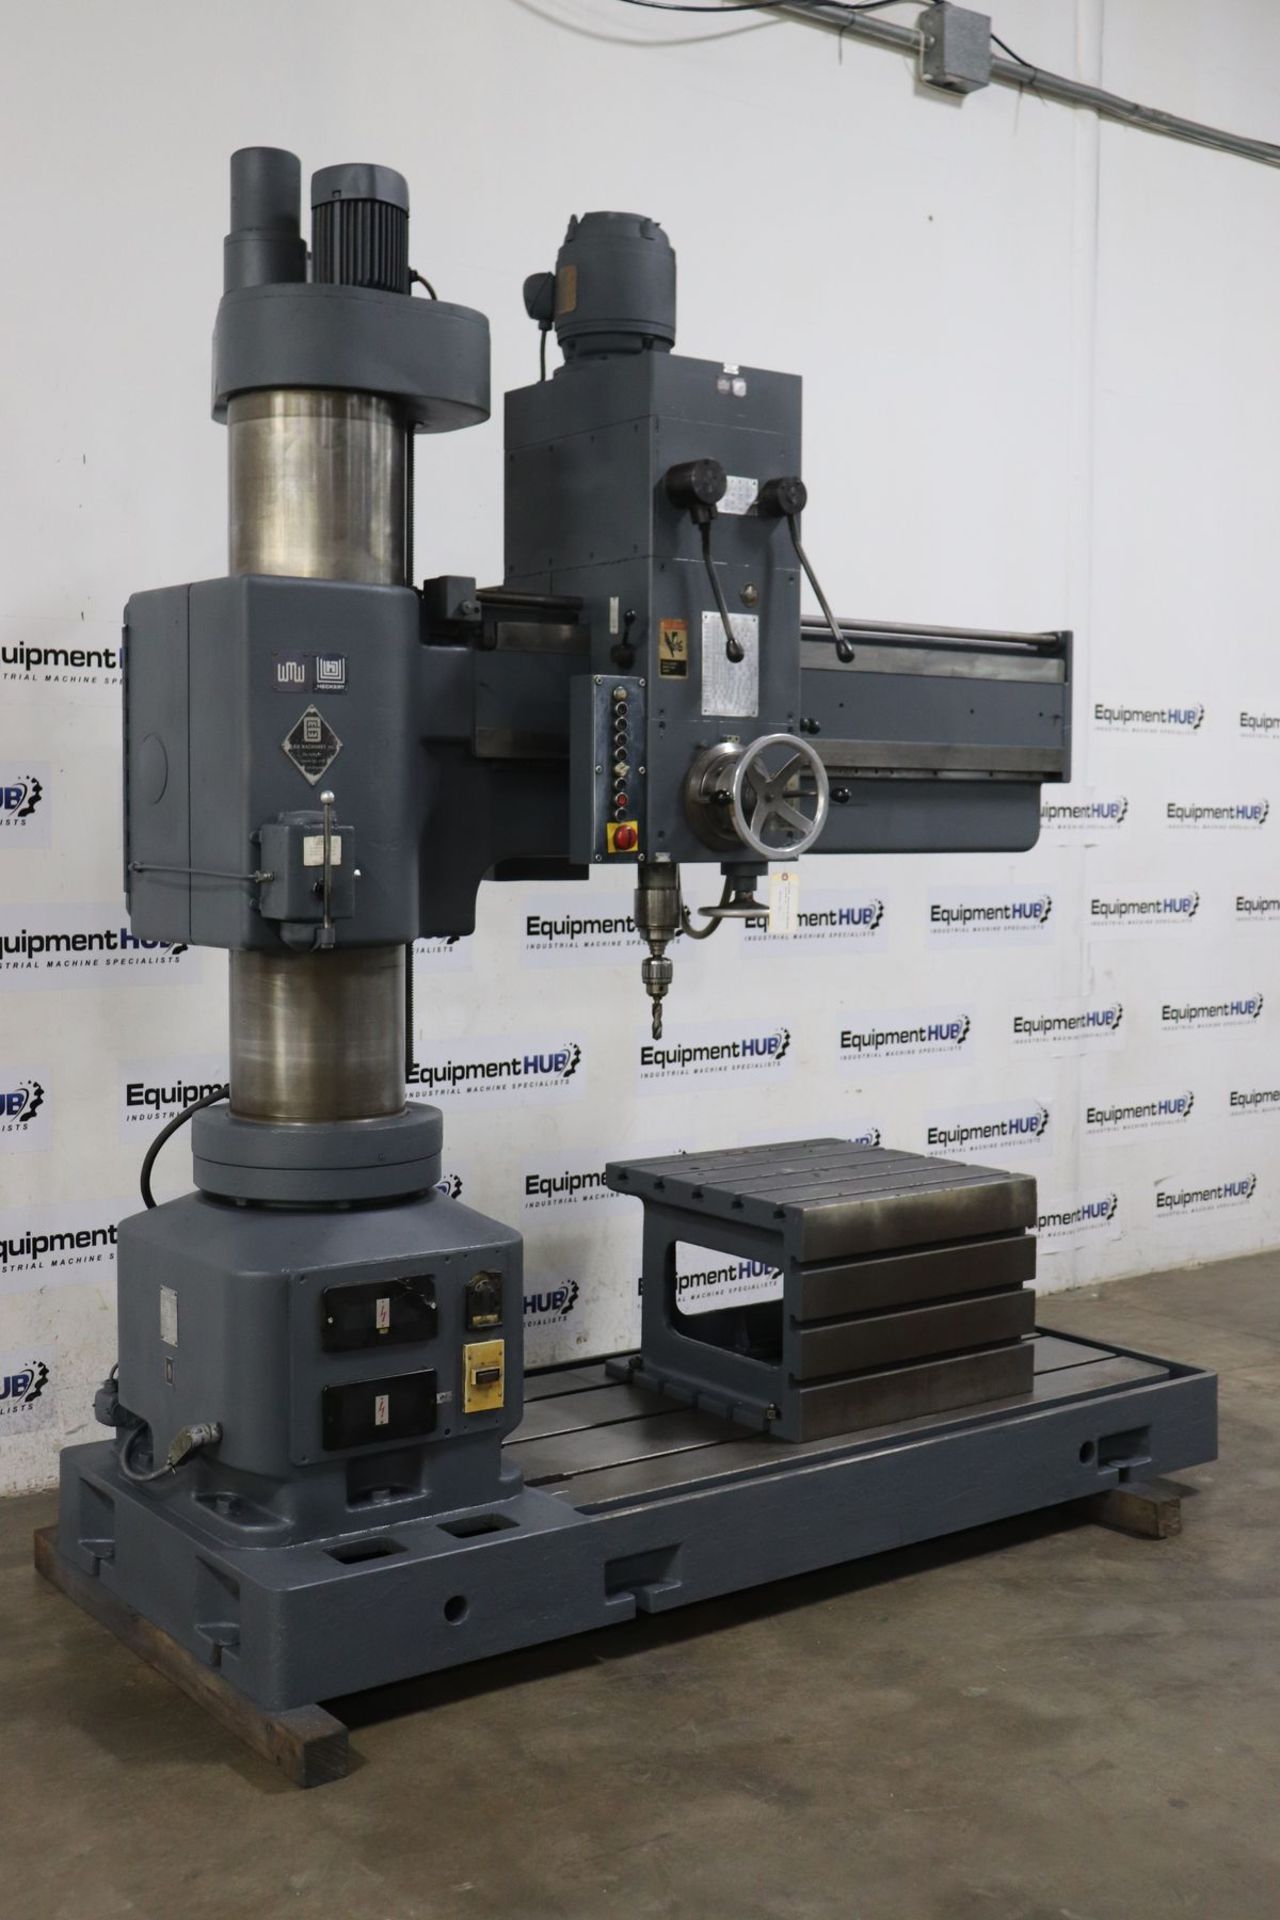 Heckert WMW BR 50 x 1600 5? x 13? Radial Arm Drilling & Tapping Machine - Image 4 of 13